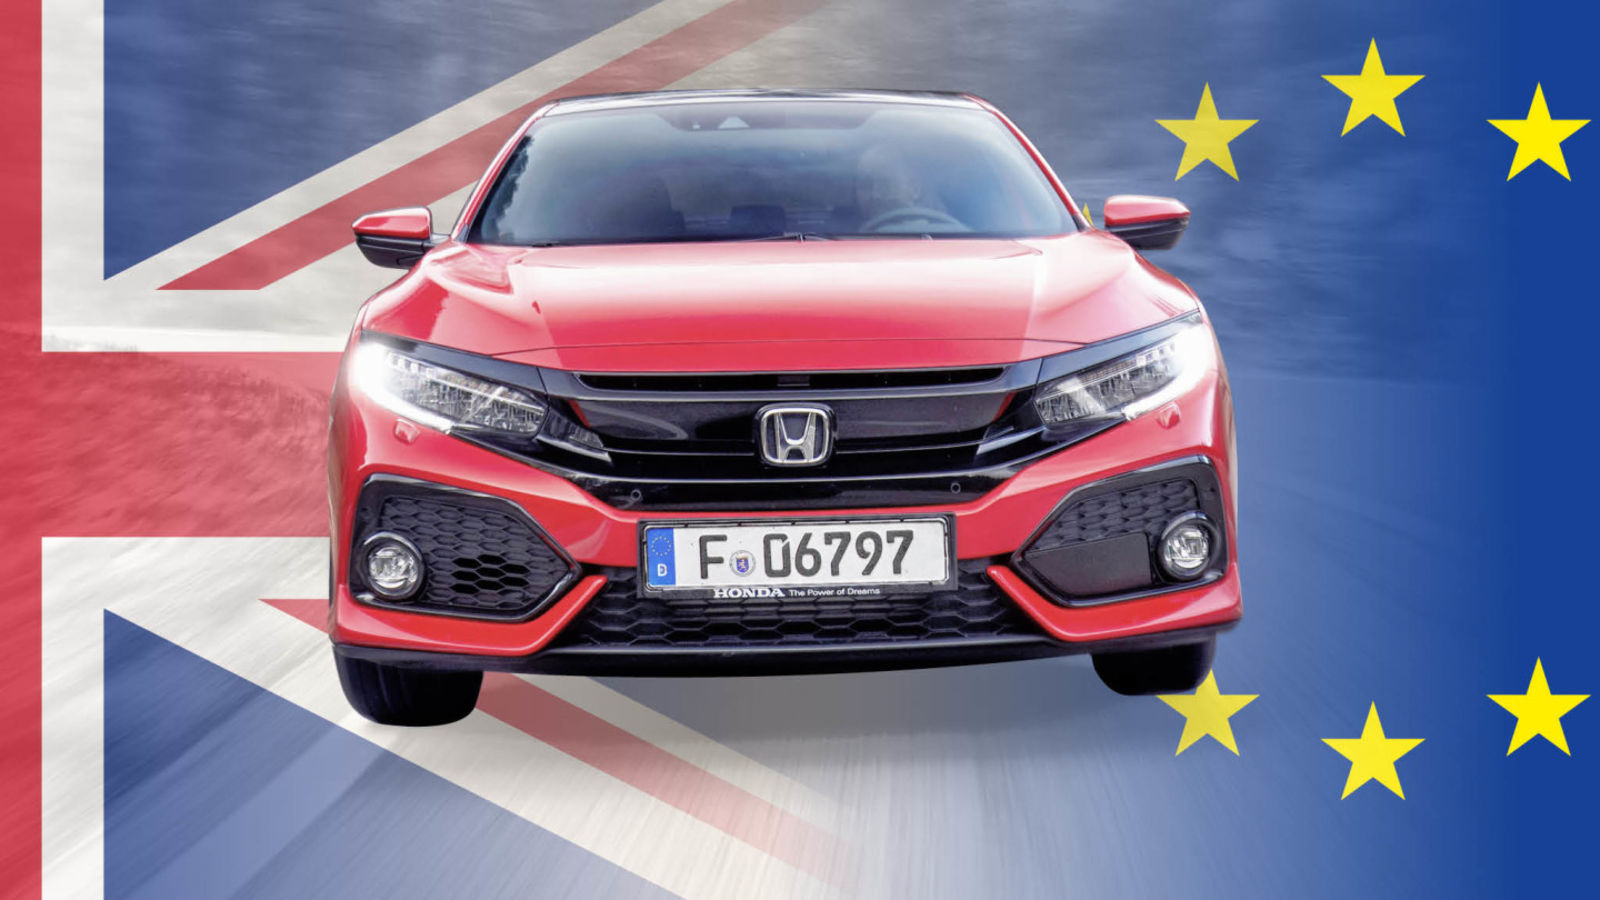 Illustration for article titled Honda is likely to close its sole European factory